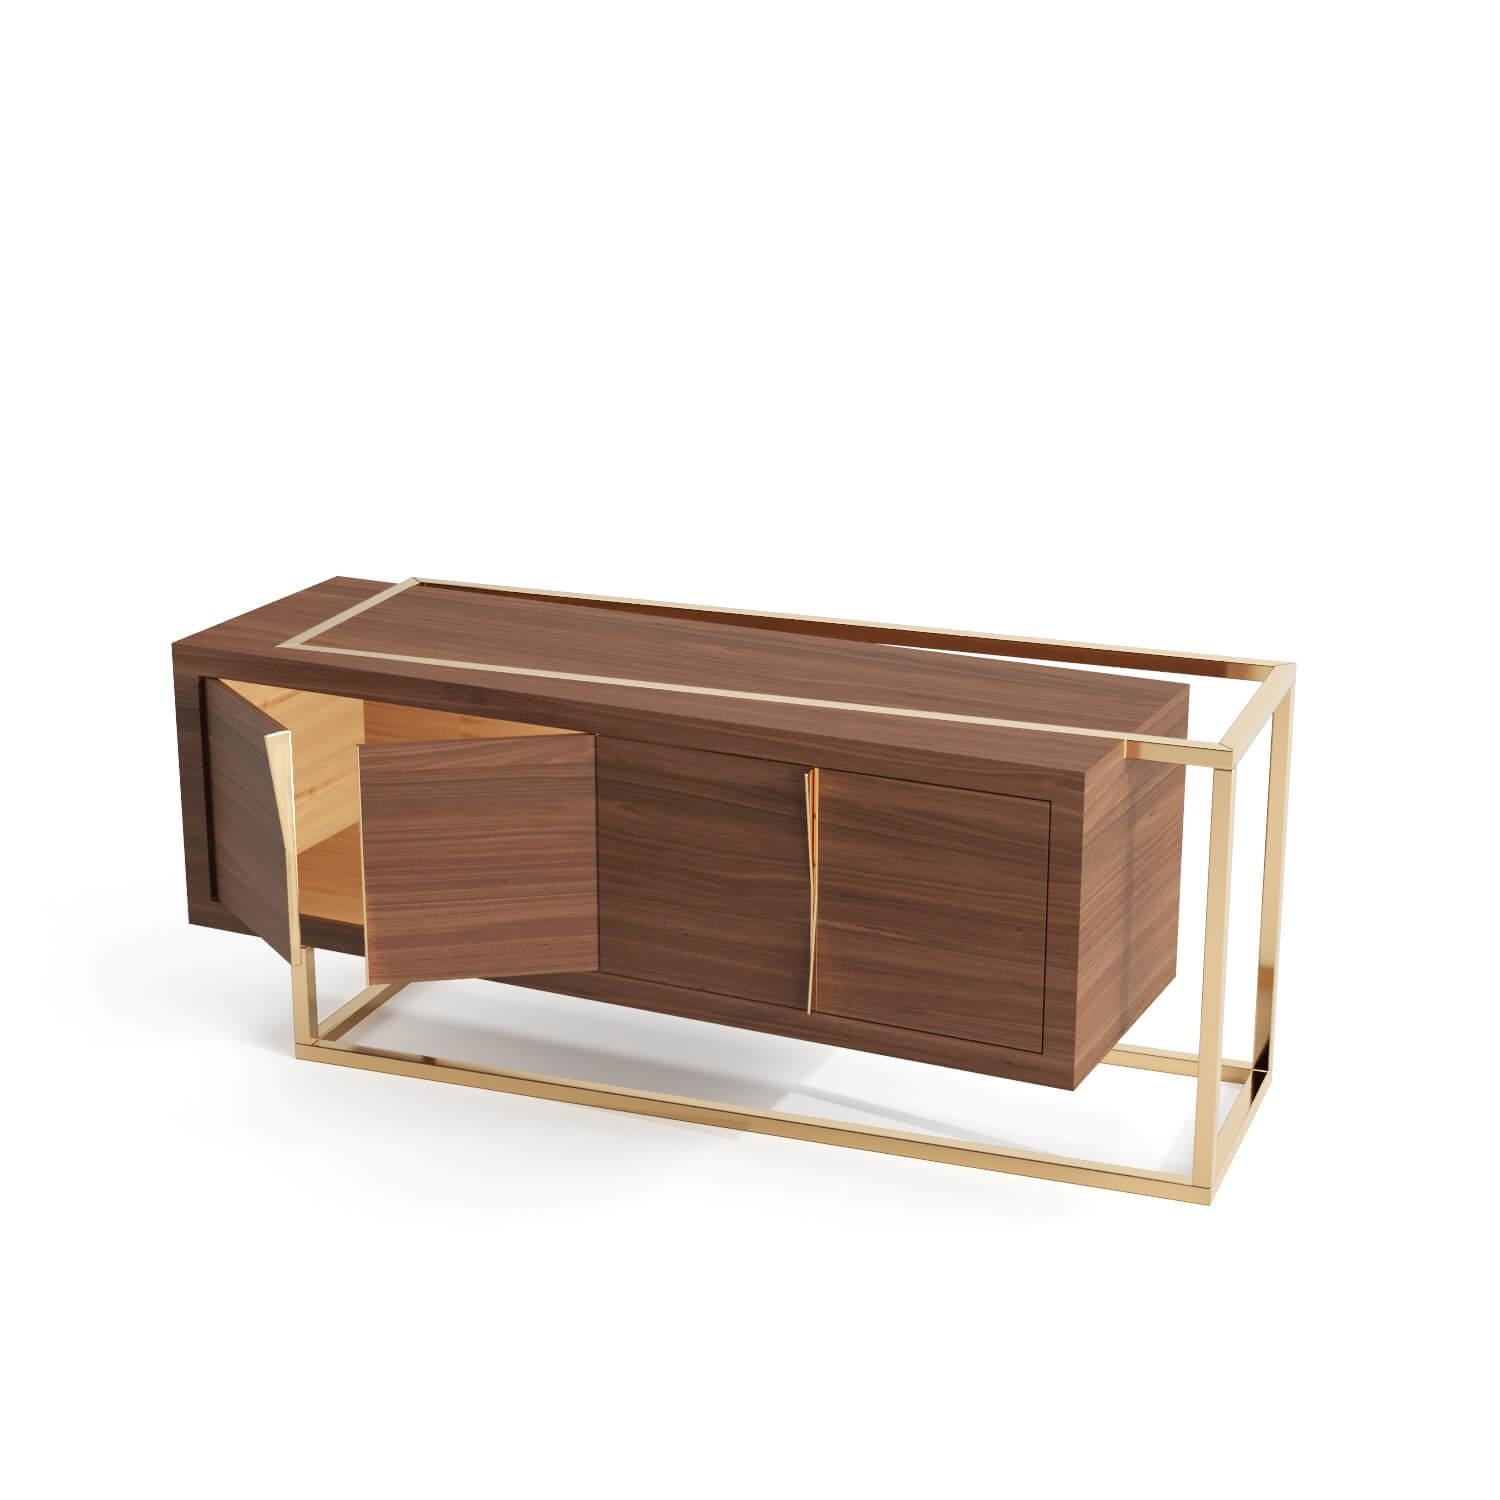 Lacquered Modern Minimalist Credenza Sideboard in Walnut Wood and Brushed Brass For Sale